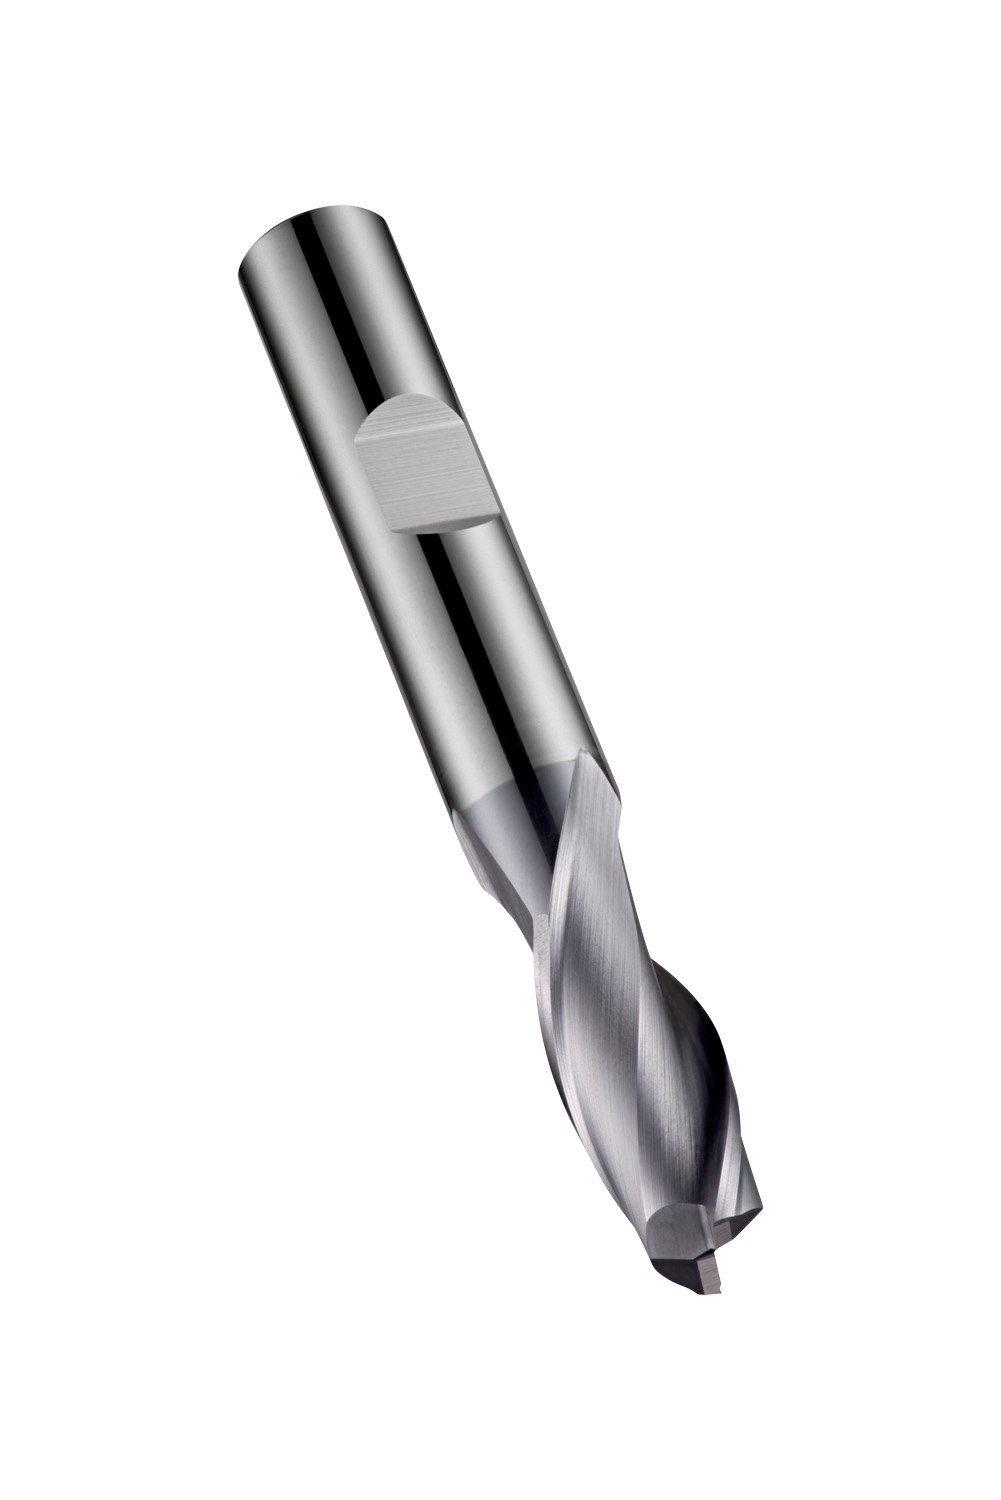 S92210.0 - End Mills